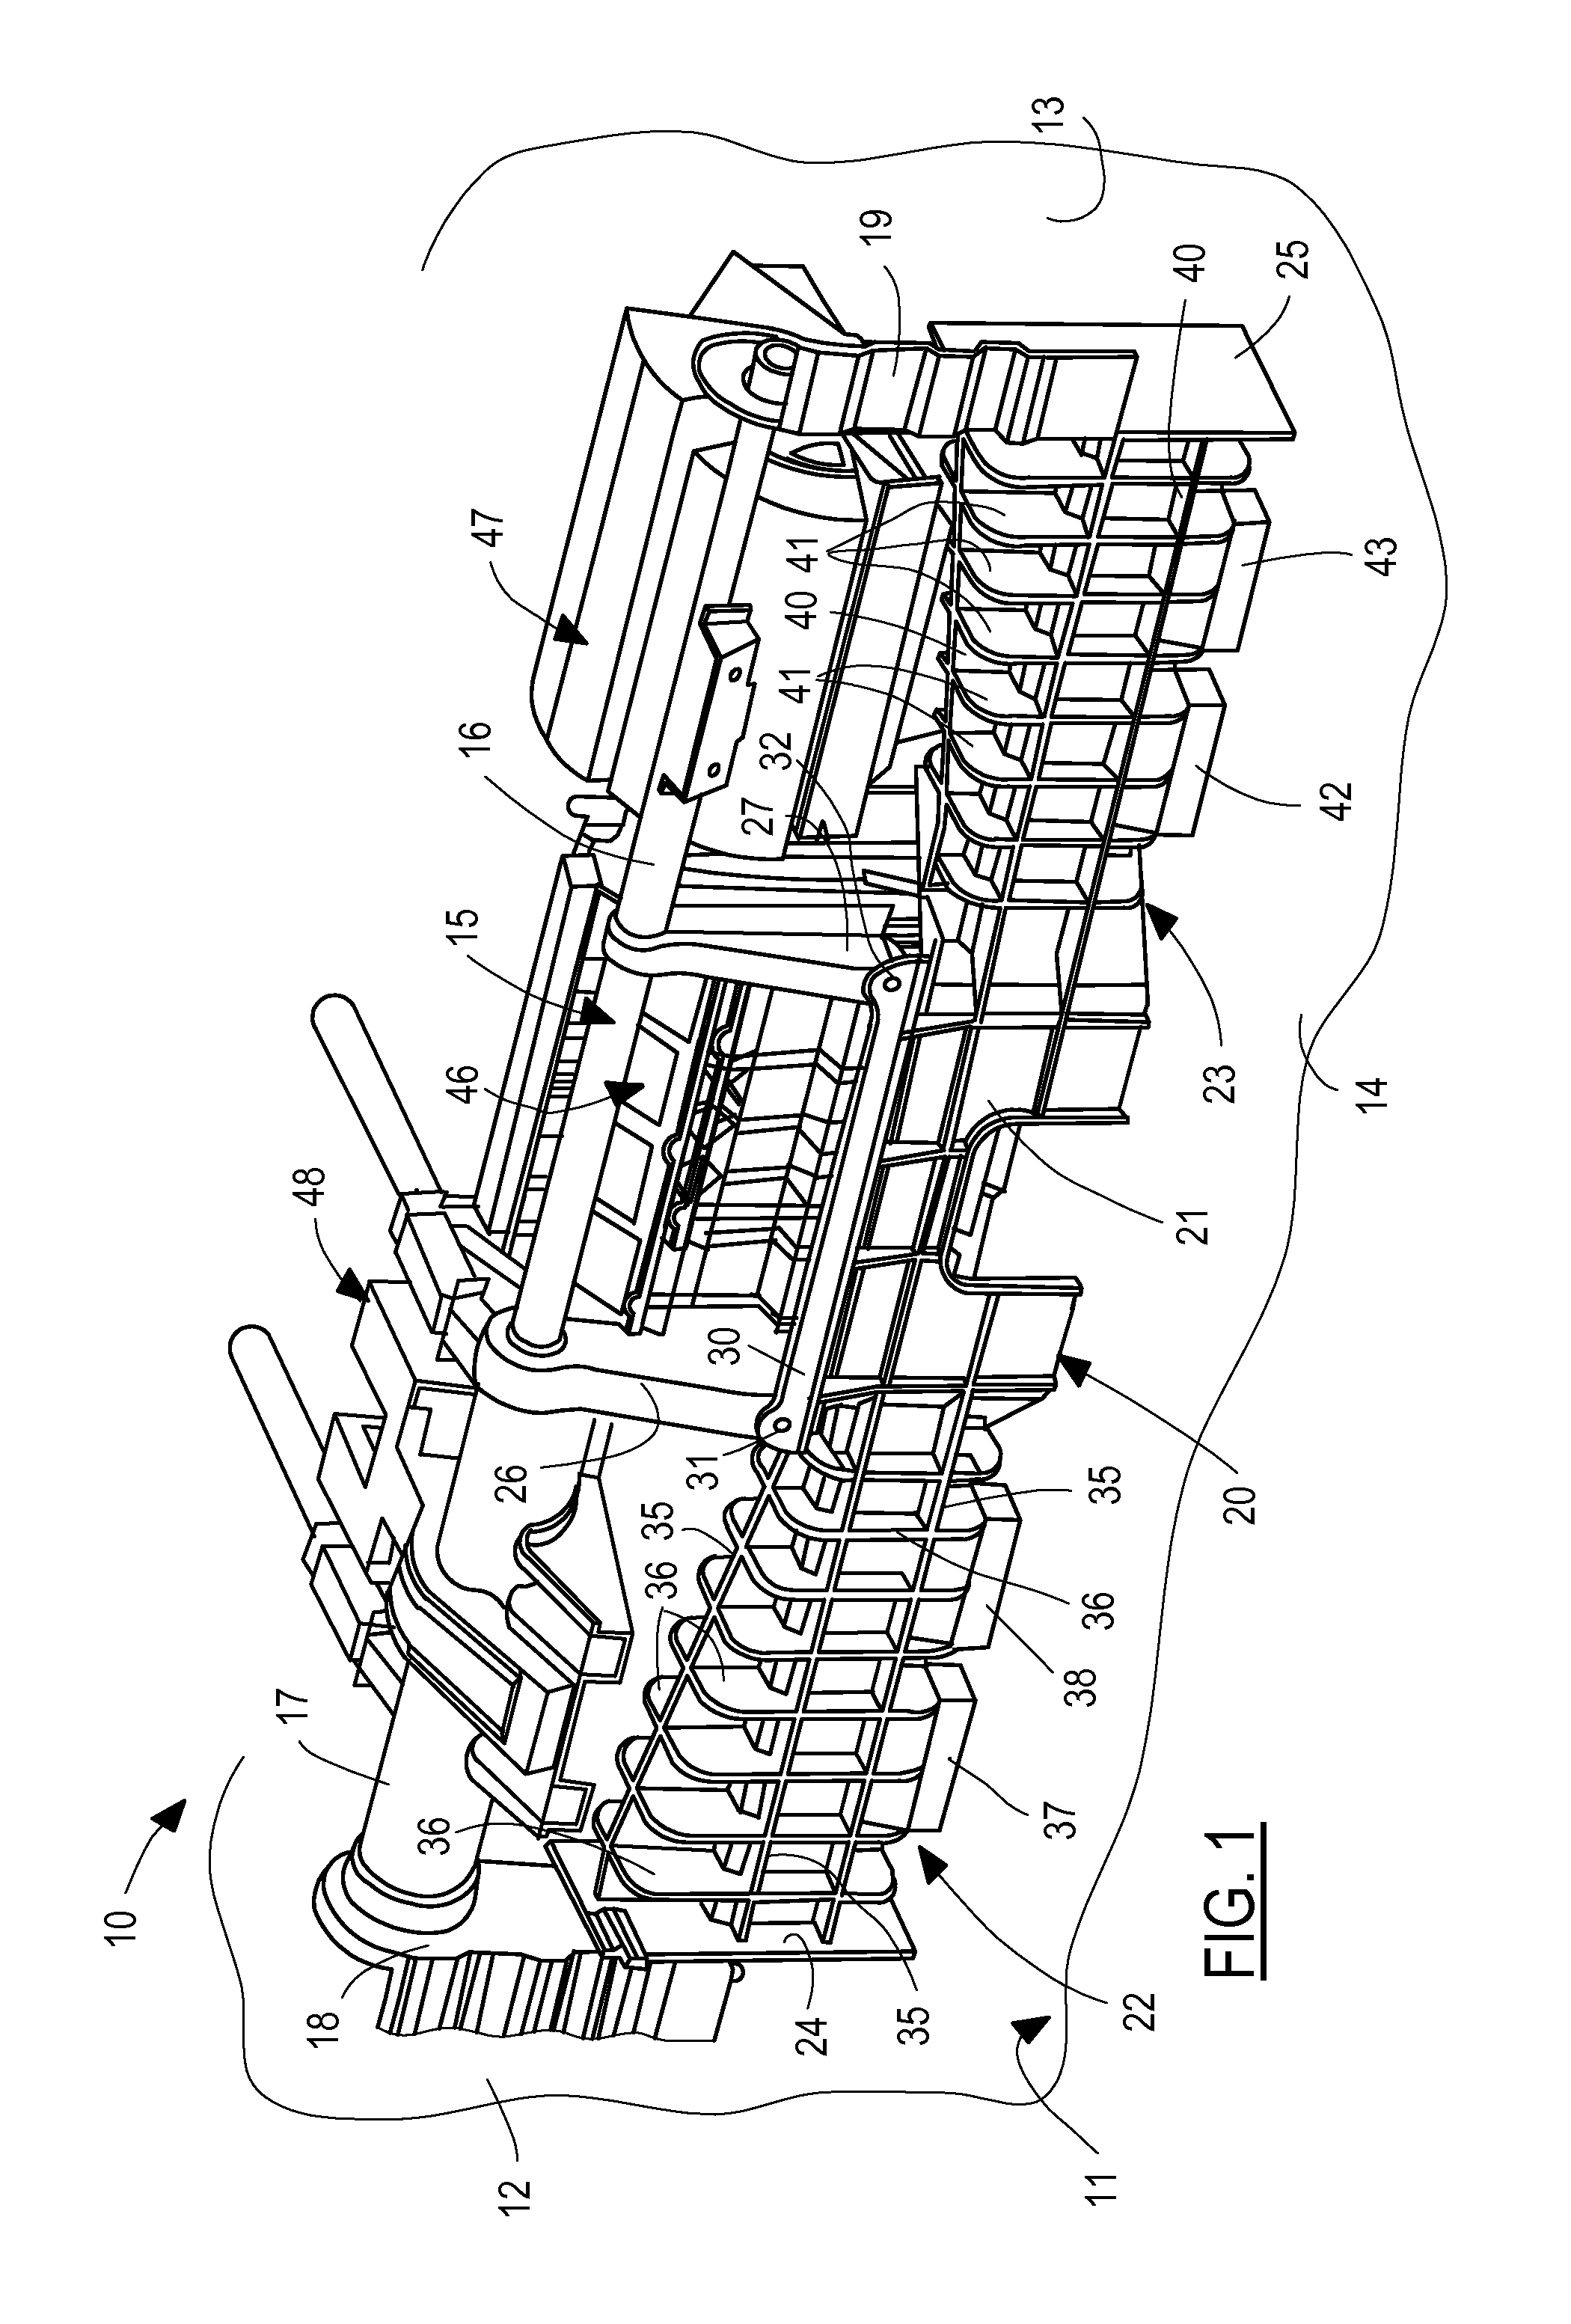 Cross-car structural support with integrated HVAC floor duct